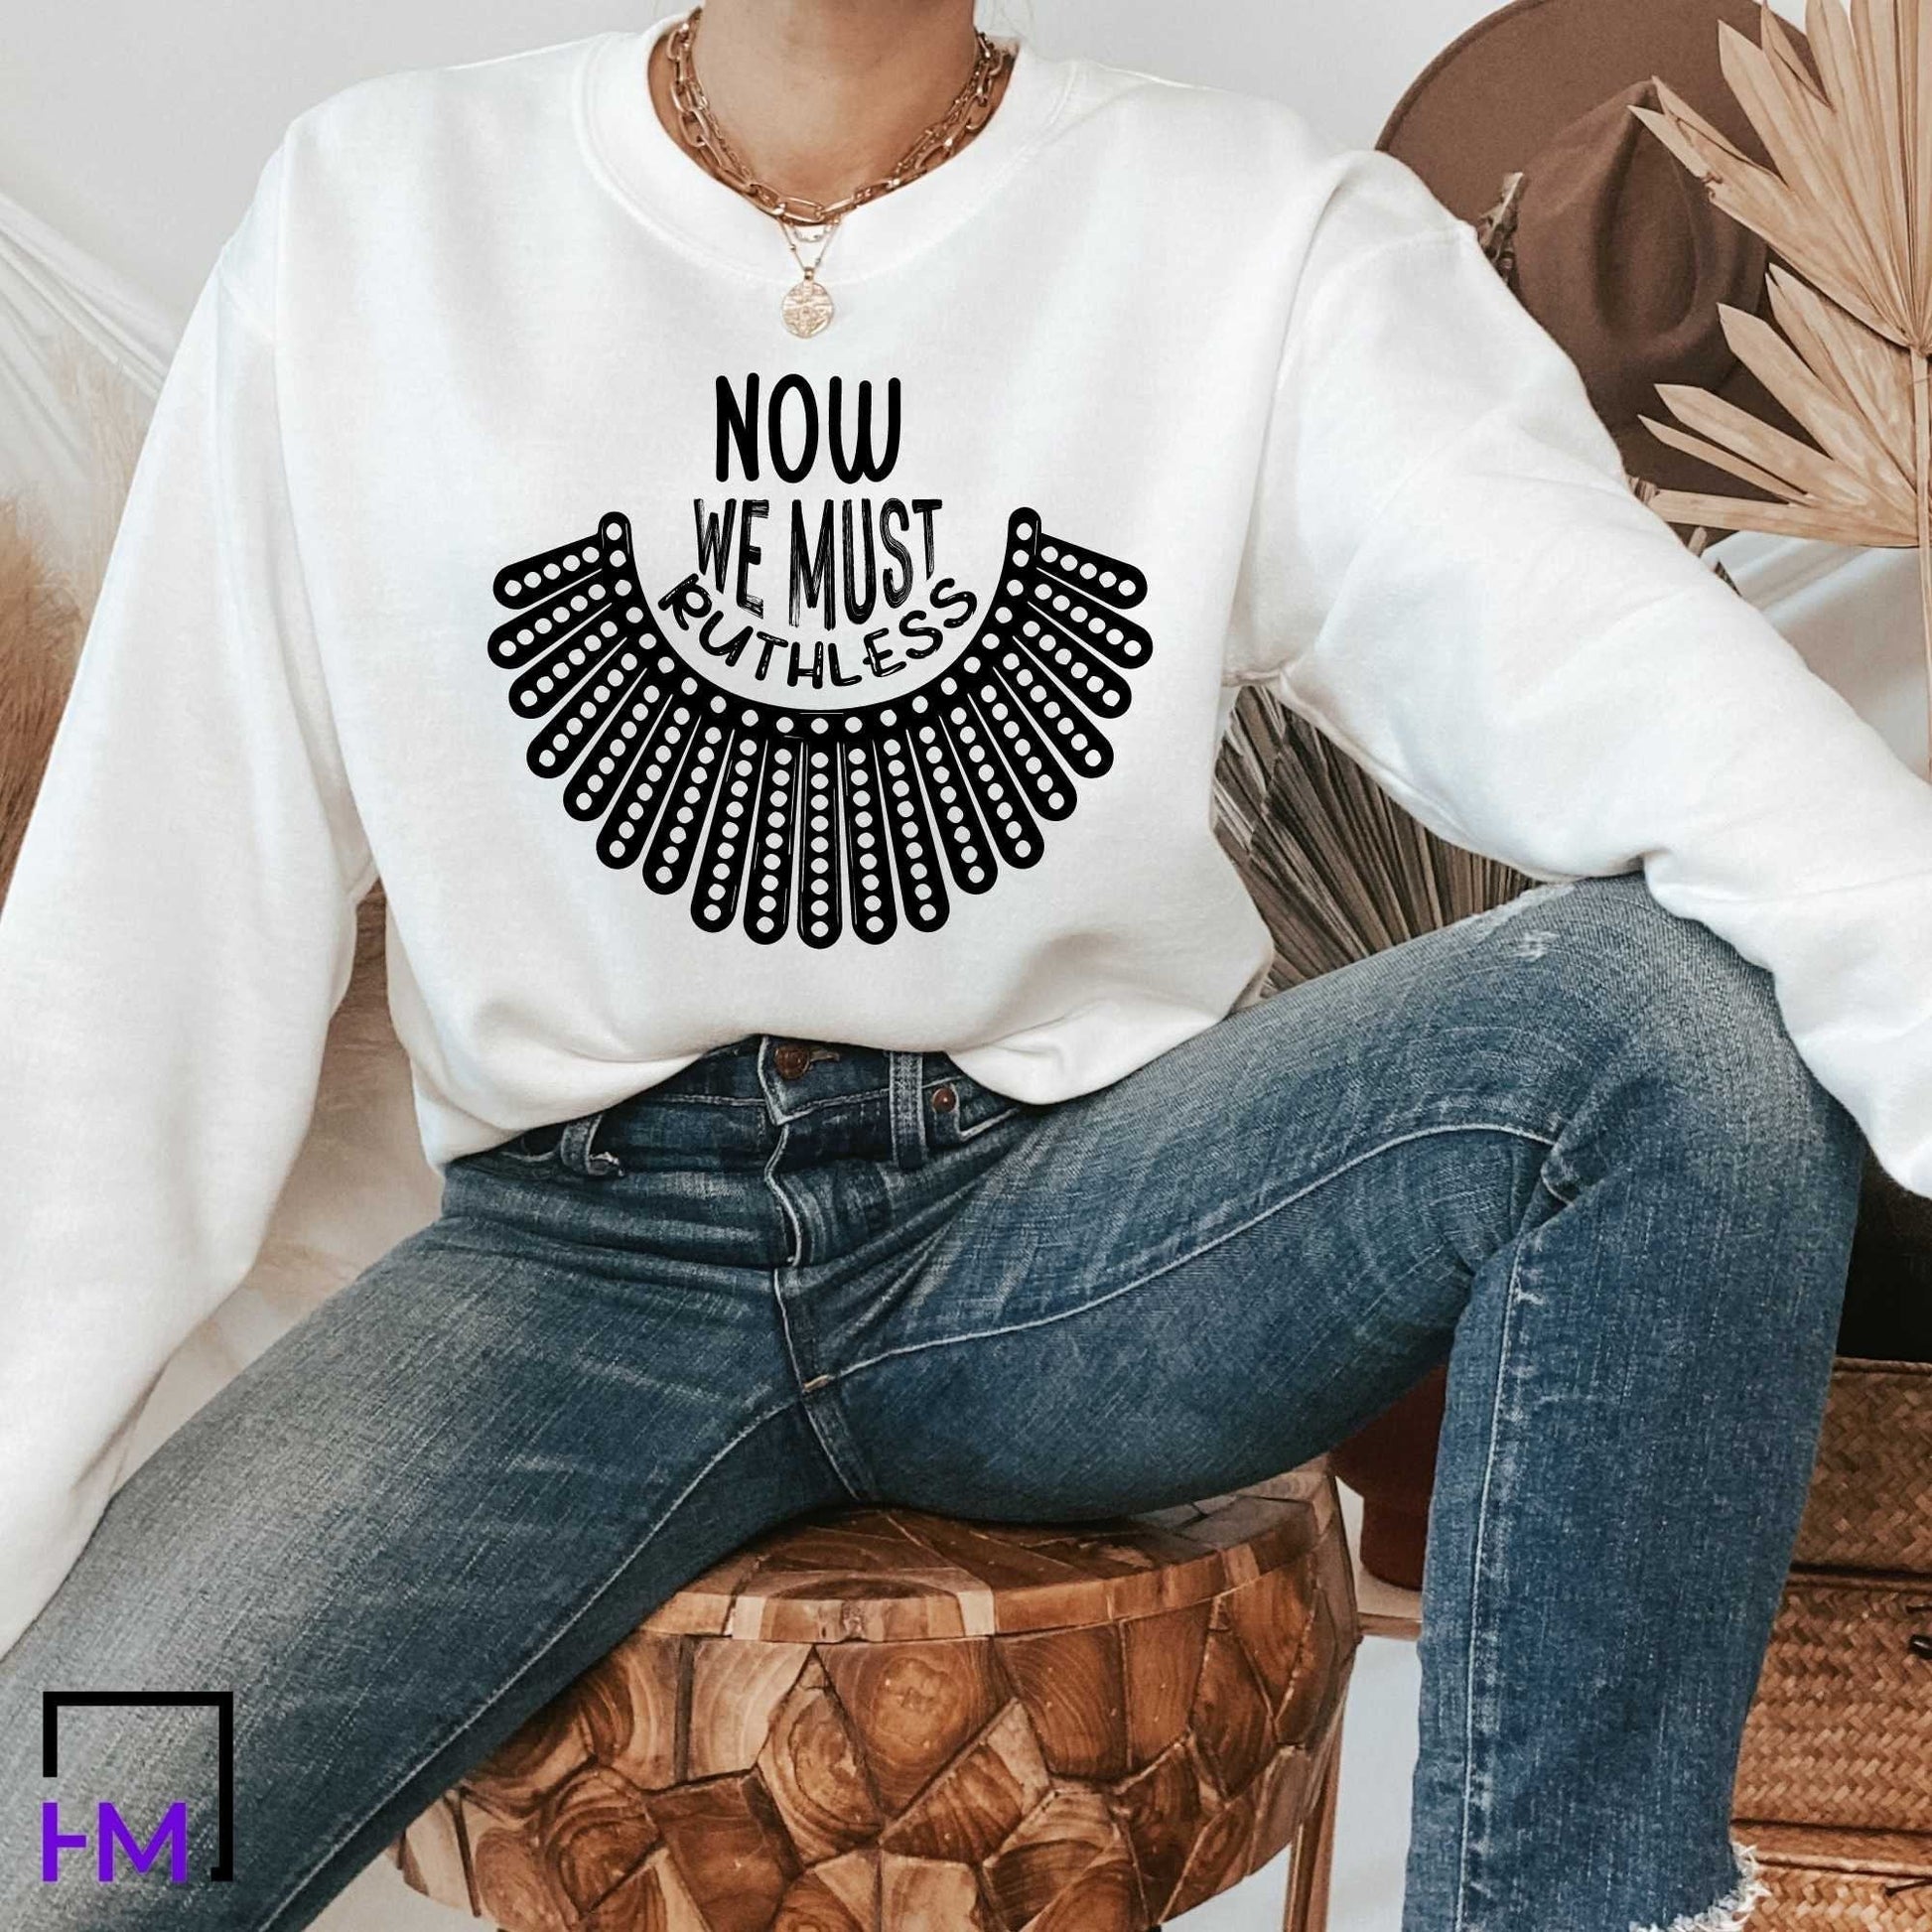 RBG Shirt| Ruthless Vote For Women's Equality, Human Rights, Reproductive, Feminism, Feminist Election, Political Tops, Tees & Sweatshirts HMDesignStudioUS